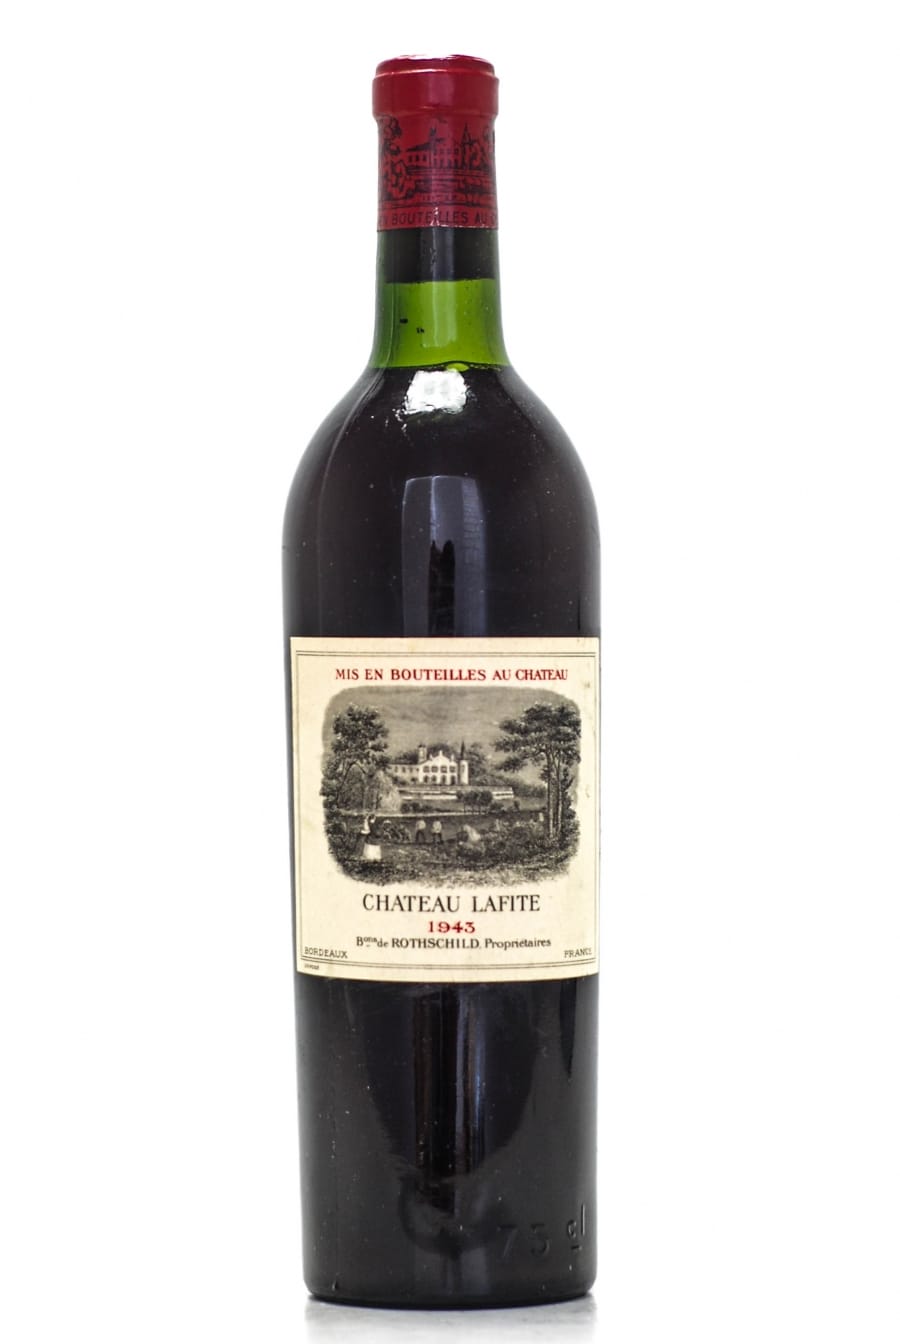 Chateau Lafite Rothschild - Chateau Lafite Rothschild 1943 Perfect, recorked